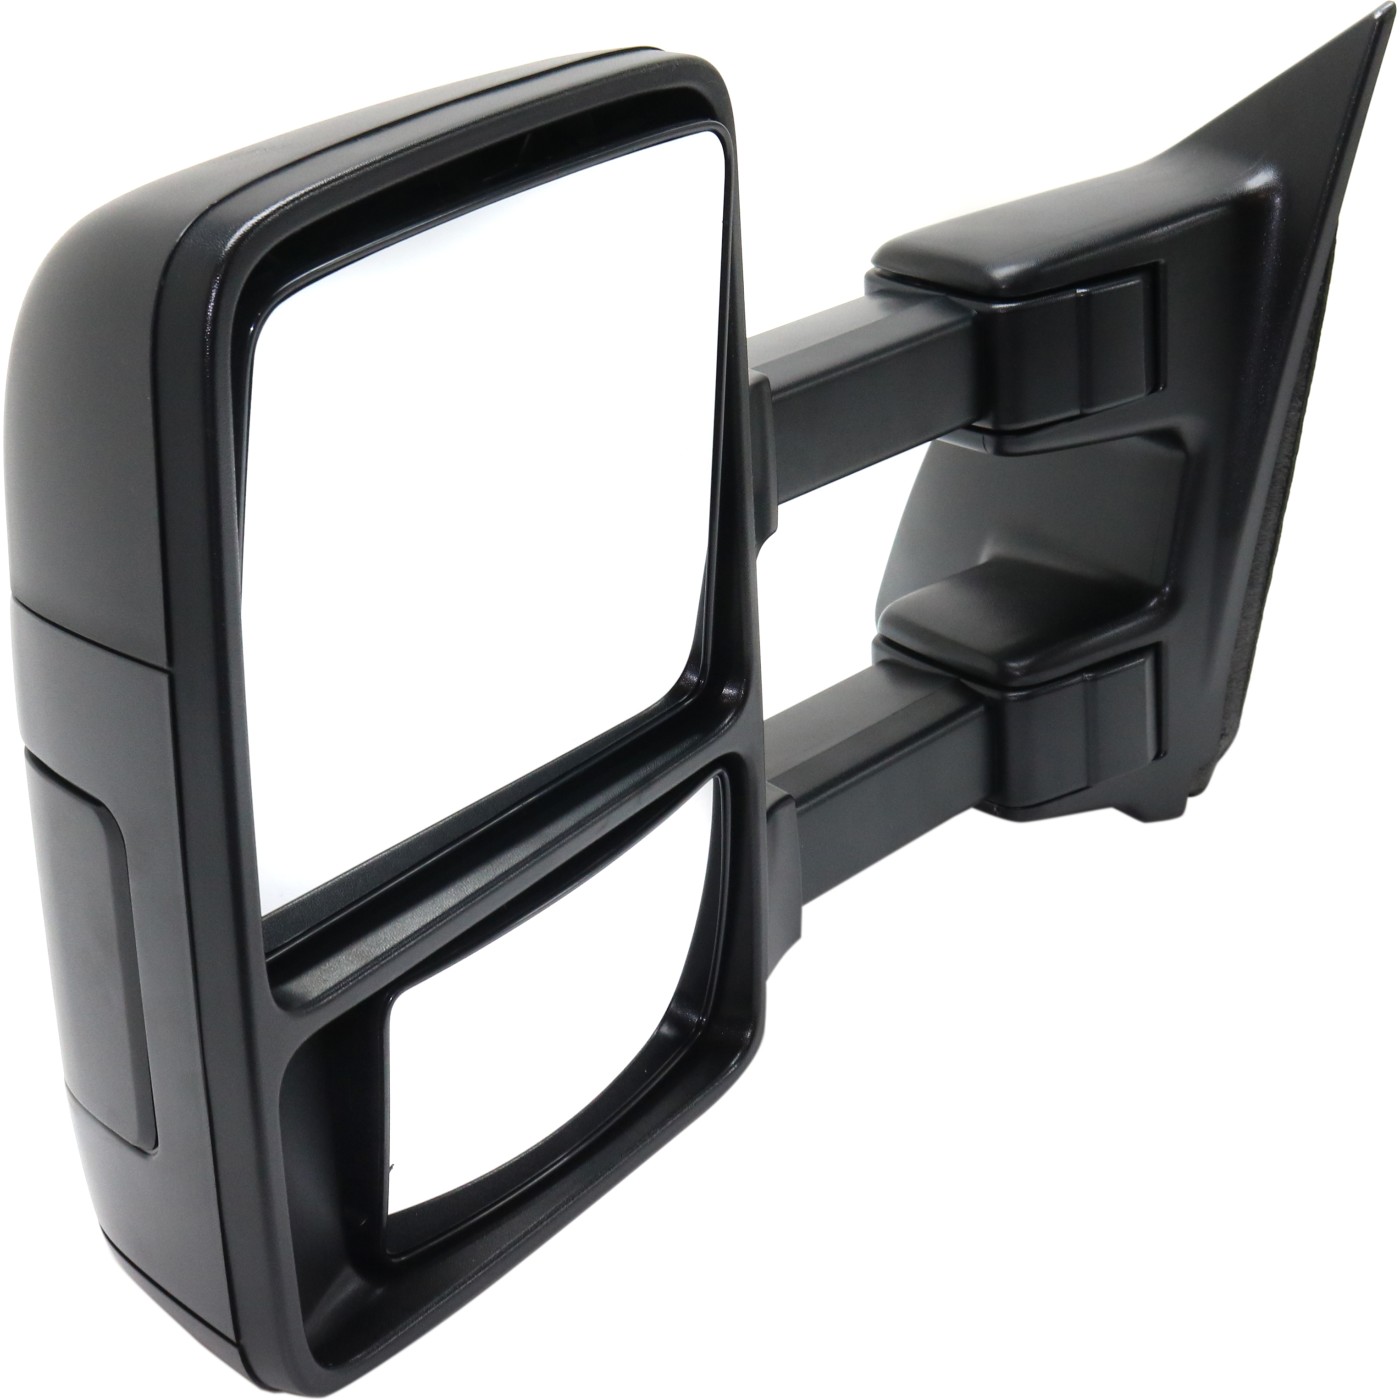 Tow Mirror For 2008 2010 Ford F-250 Super Duty Left Side Manual Fold Blind Spot | eBay 2008 Ford F250 Super Duty Side Mirror